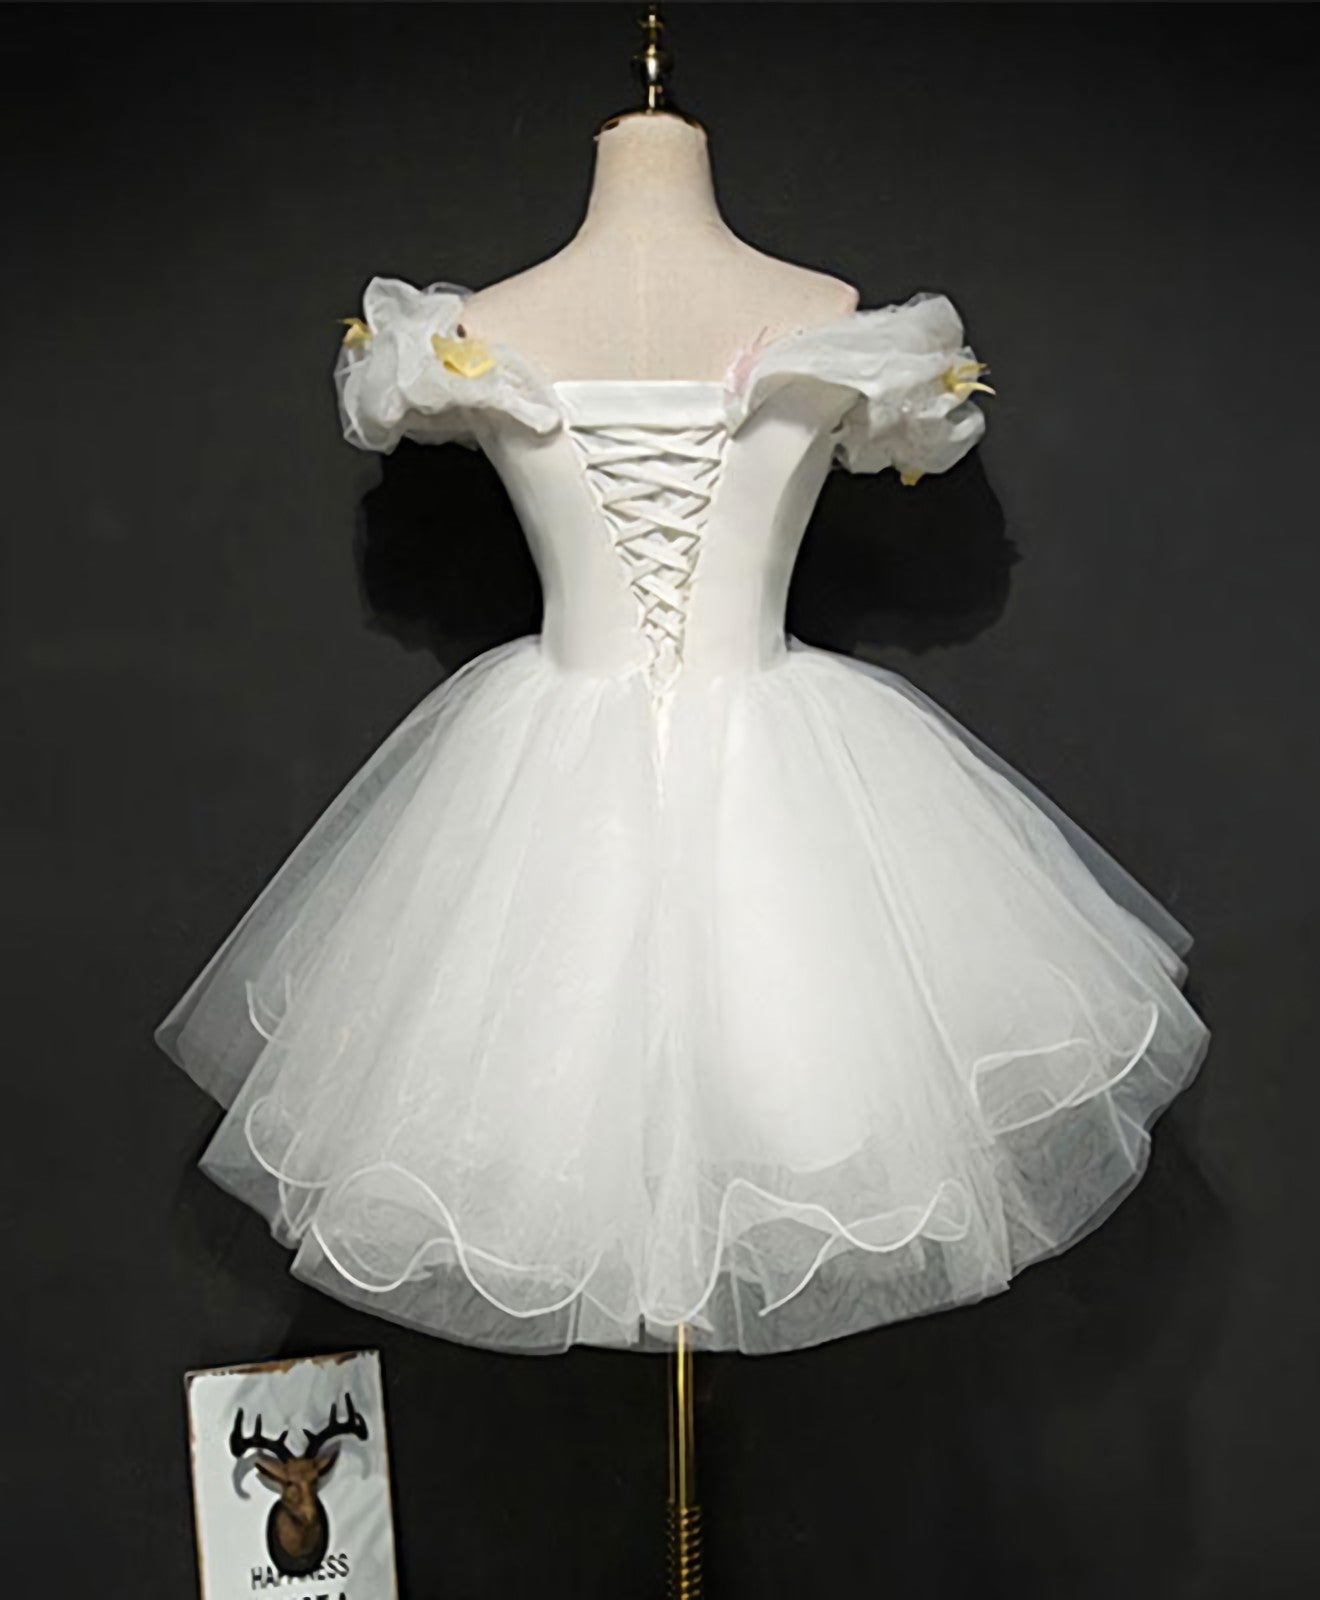 Party Dress With Glitter, Cute White Tulle Short Prom Gown White Homecoming Dress